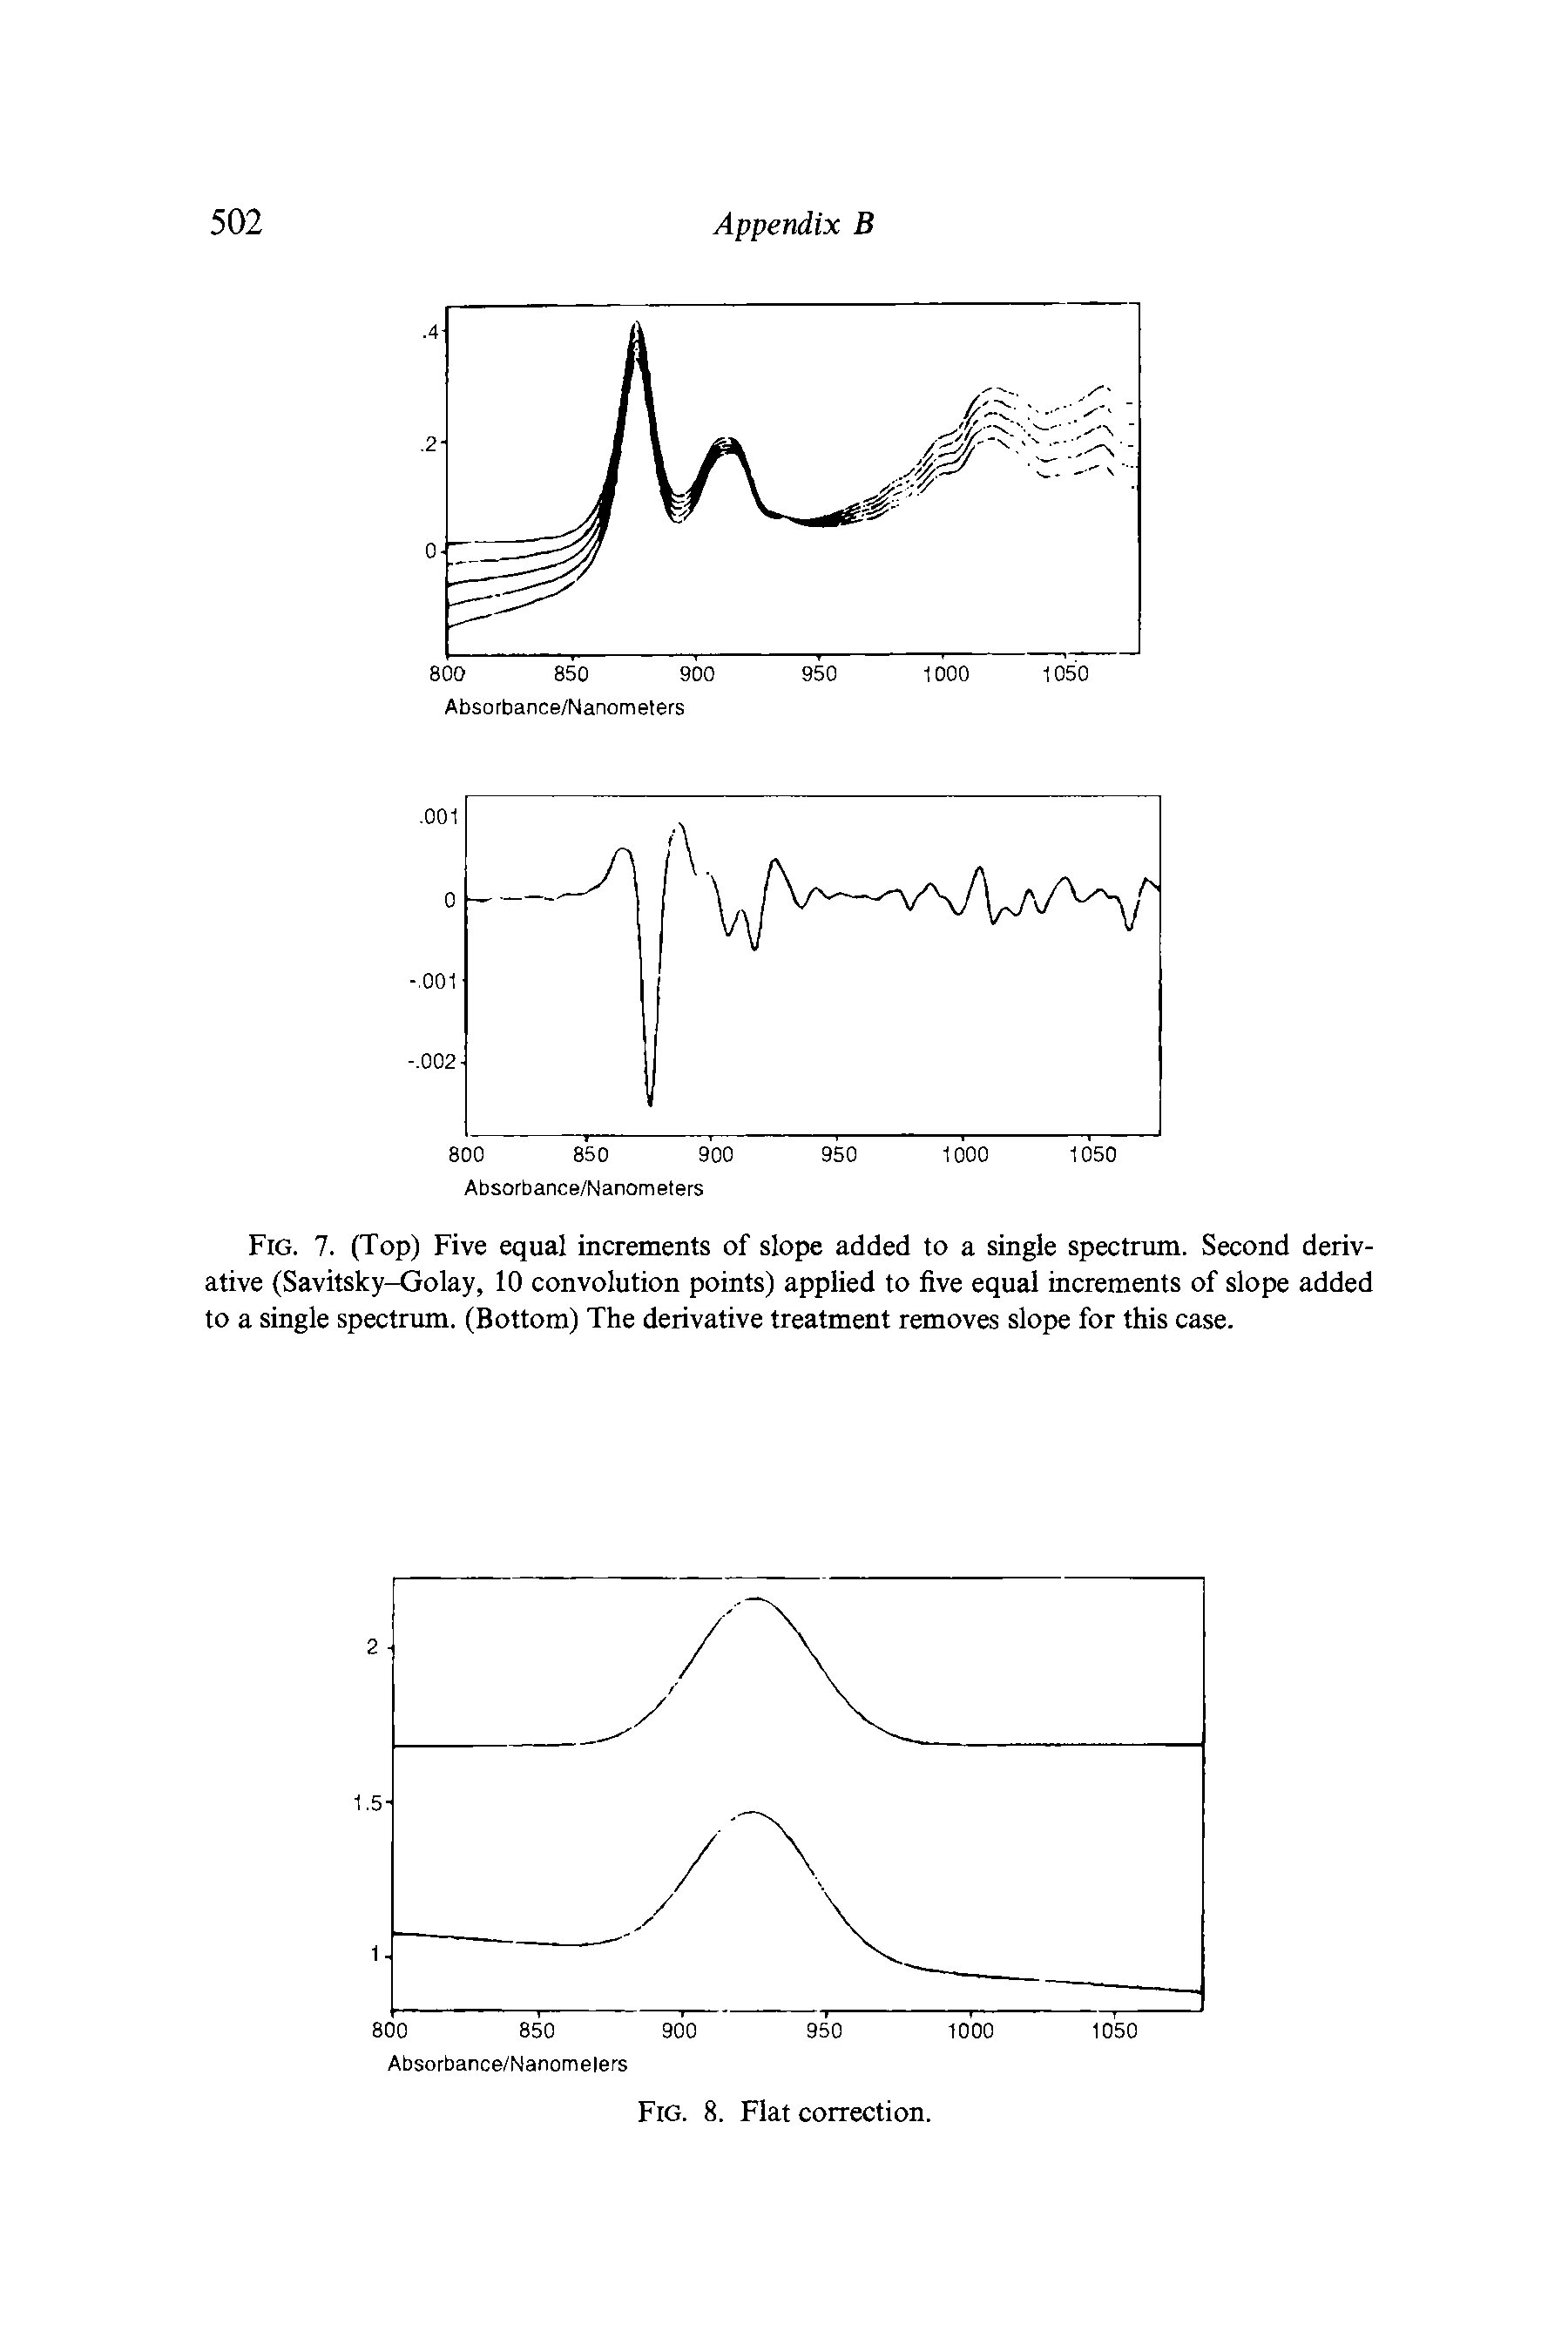 Fig. 7. (Top) Five equal increments of slope added to a single spectrum. Second derivative (Savitsky-Golay, 10 convolution points) applied to five equal increments of slope added to a single spectrum. (Bottom) The derivative treatment removes slope for this case.